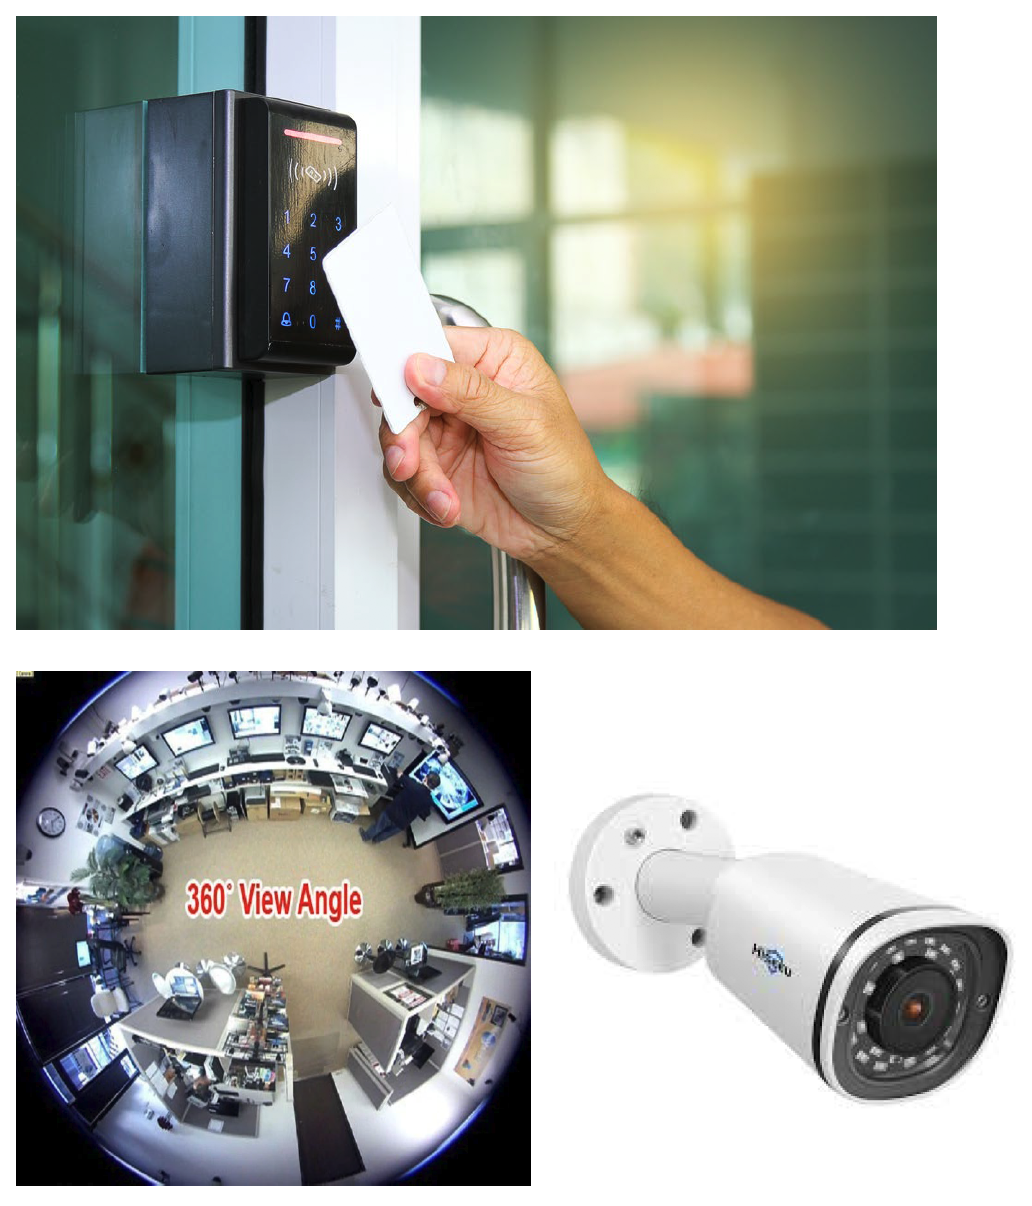 Examples of security equipment recently purchased 